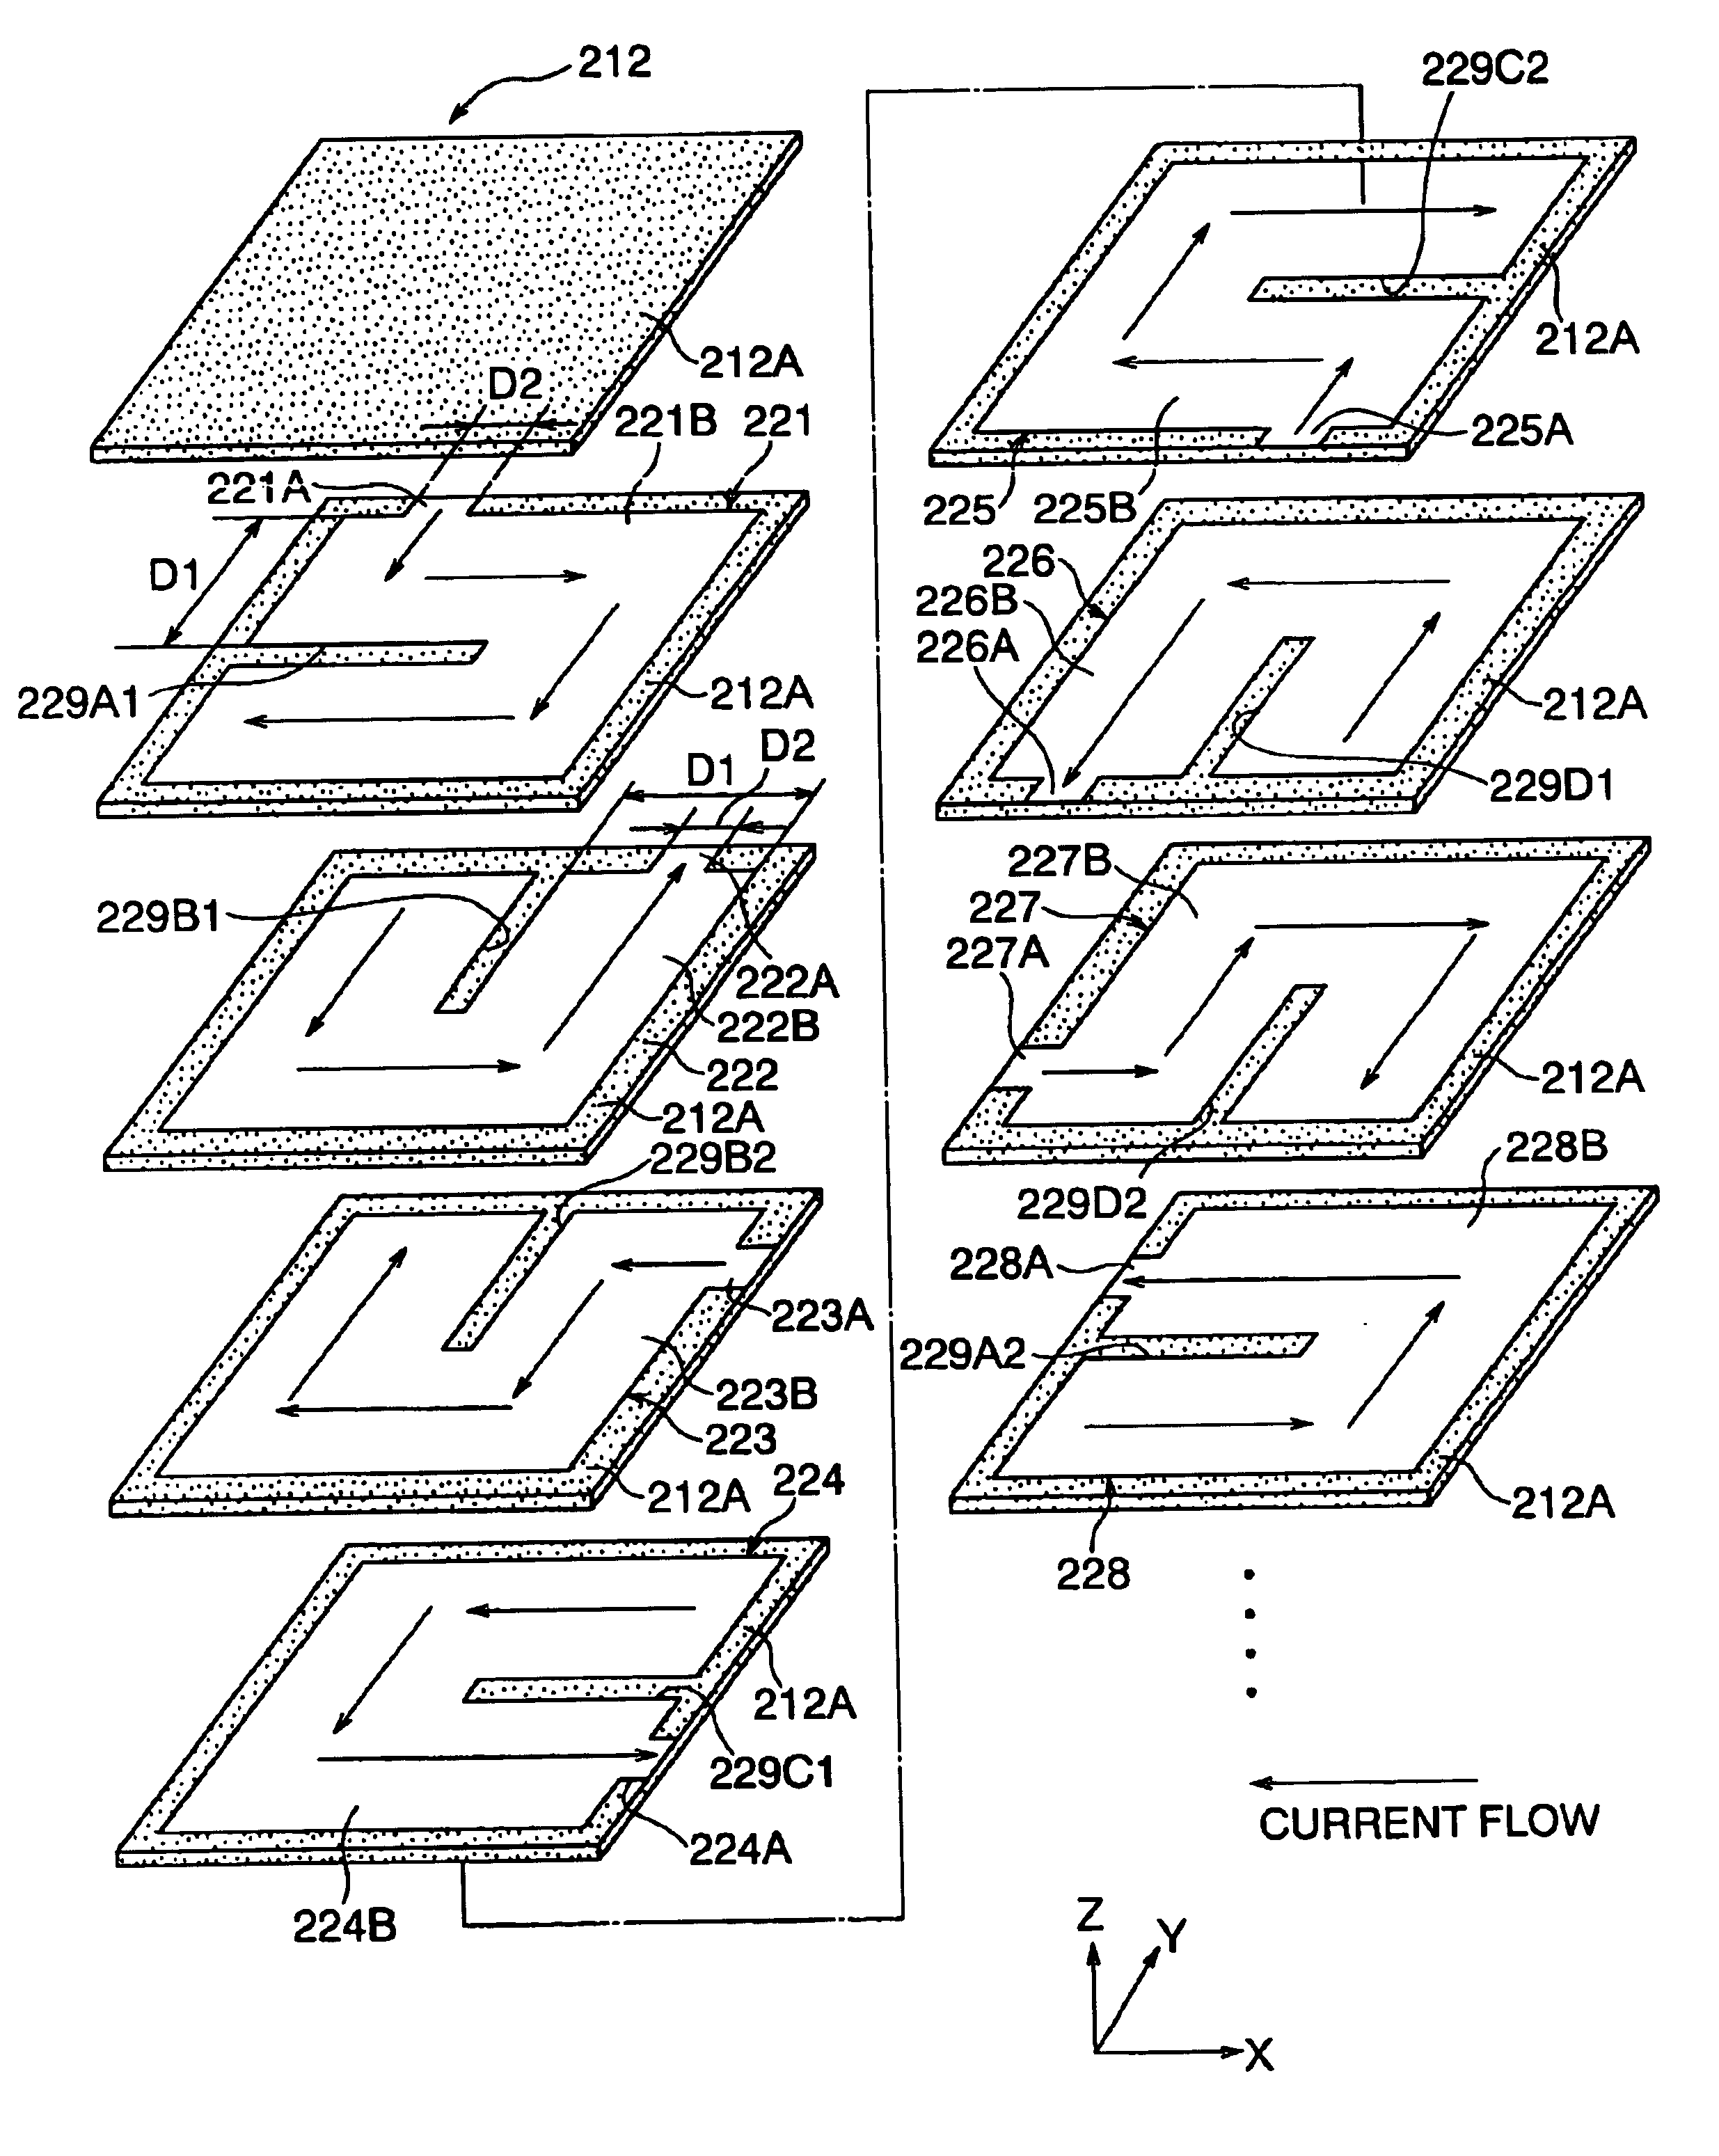 Multilayer capacitor